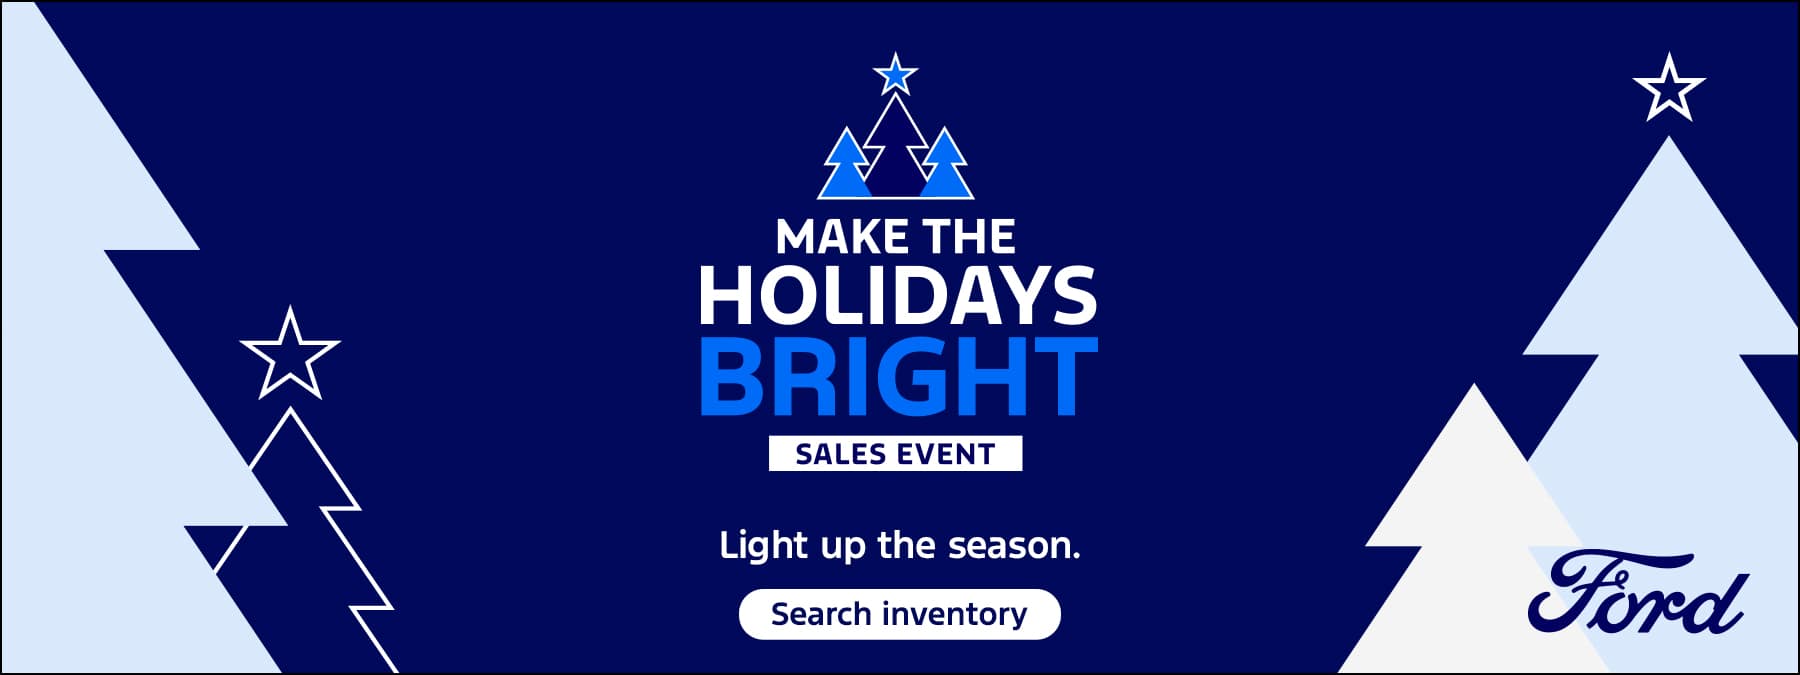 Year End Sales Event - Main Event, effective 11/15 - 12/20